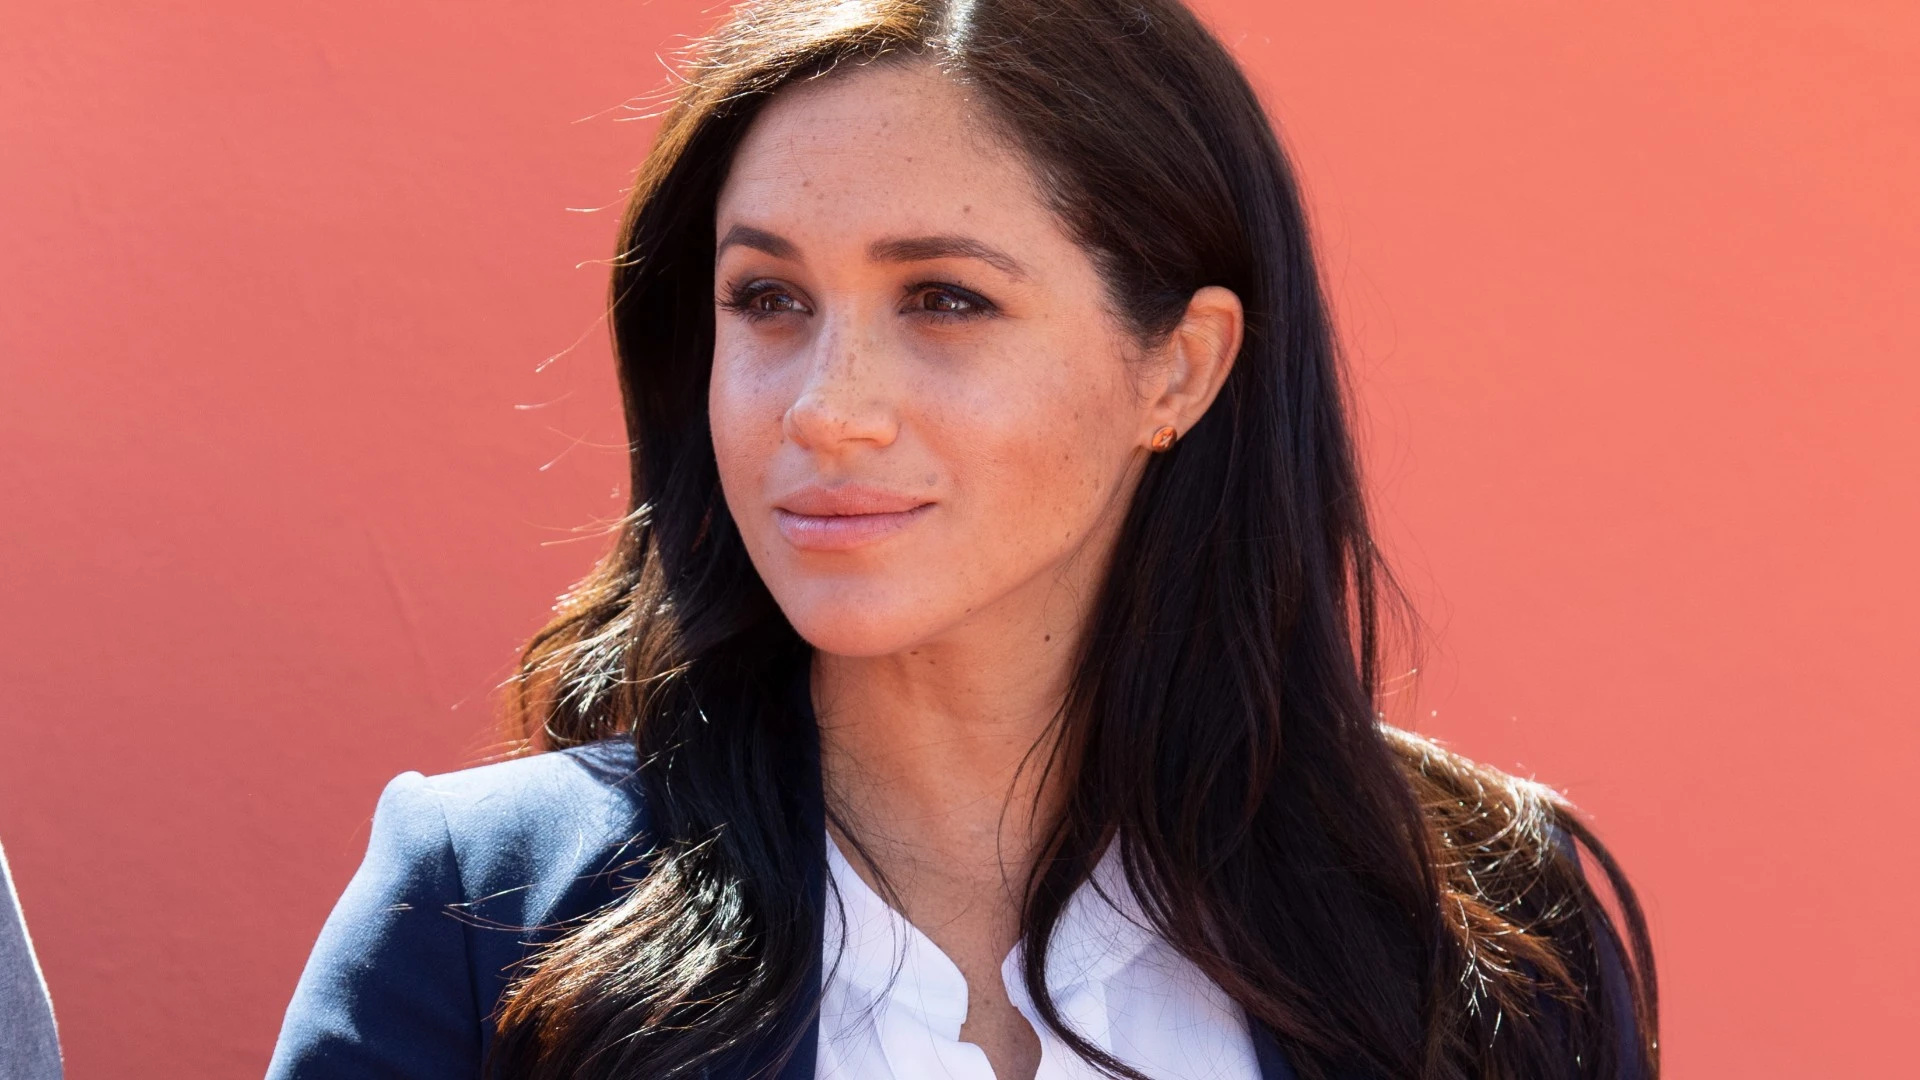 Meghan Markle criticized, Missing Trump's UK state visit, Trooping the Colour event, Royal duties, 1920x1080 Full HD Desktop